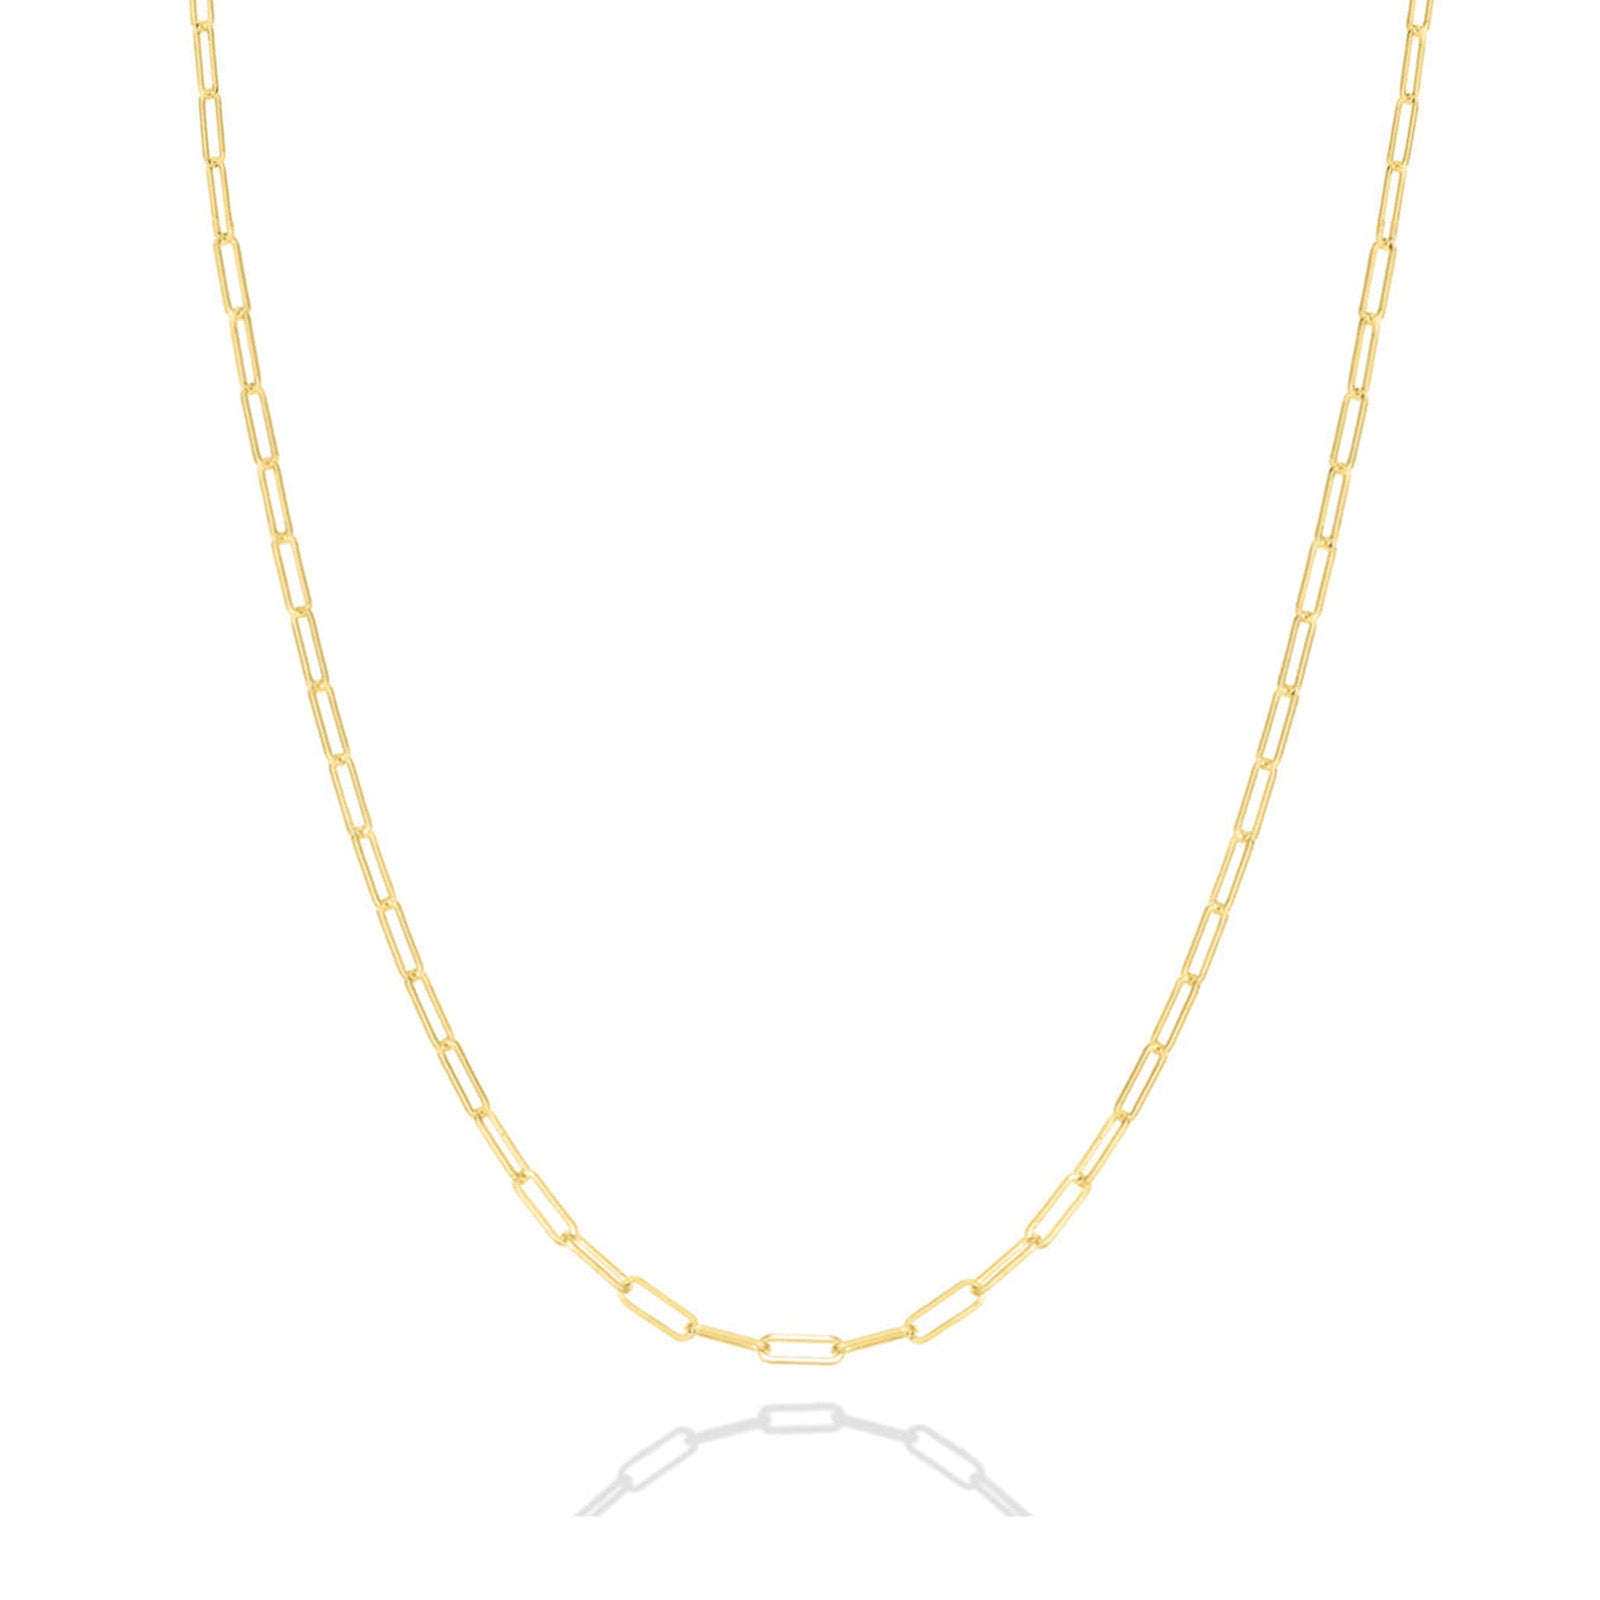 AMANDA PEARL // 14K Gold Paperclip Chain Necklace